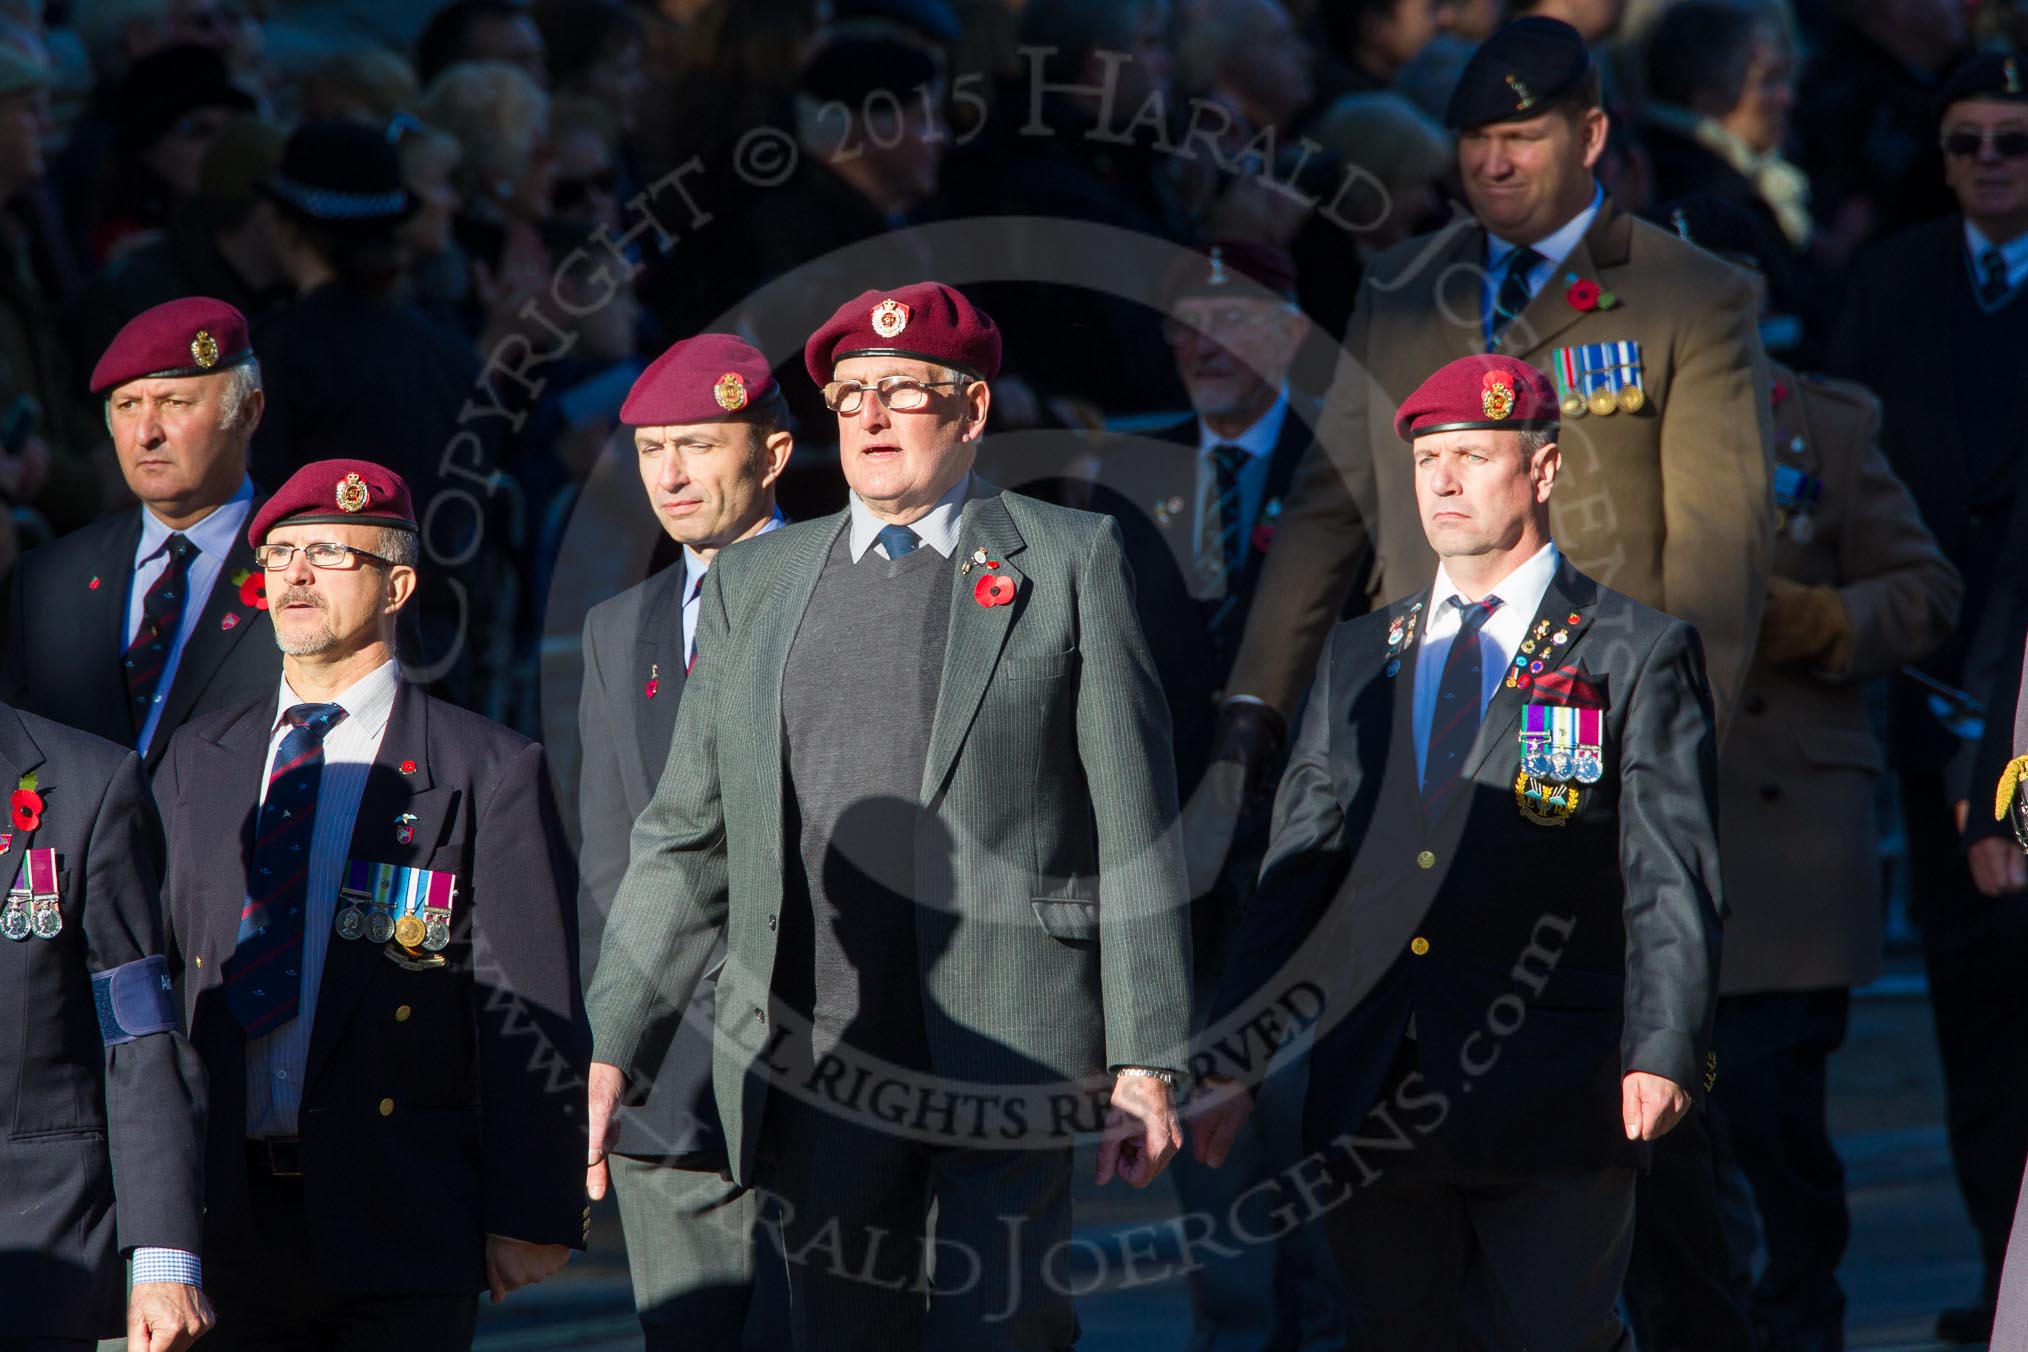 Remembrance Sunday Cenotaph March Past 2013: B22 - Airborne Engineers Association..
Press stand opposite the Foreign Office building, Whitehall, London SW1,
London,
Greater London,
United Kingdom,
on 10 November 2013 at 12:02, image #1491